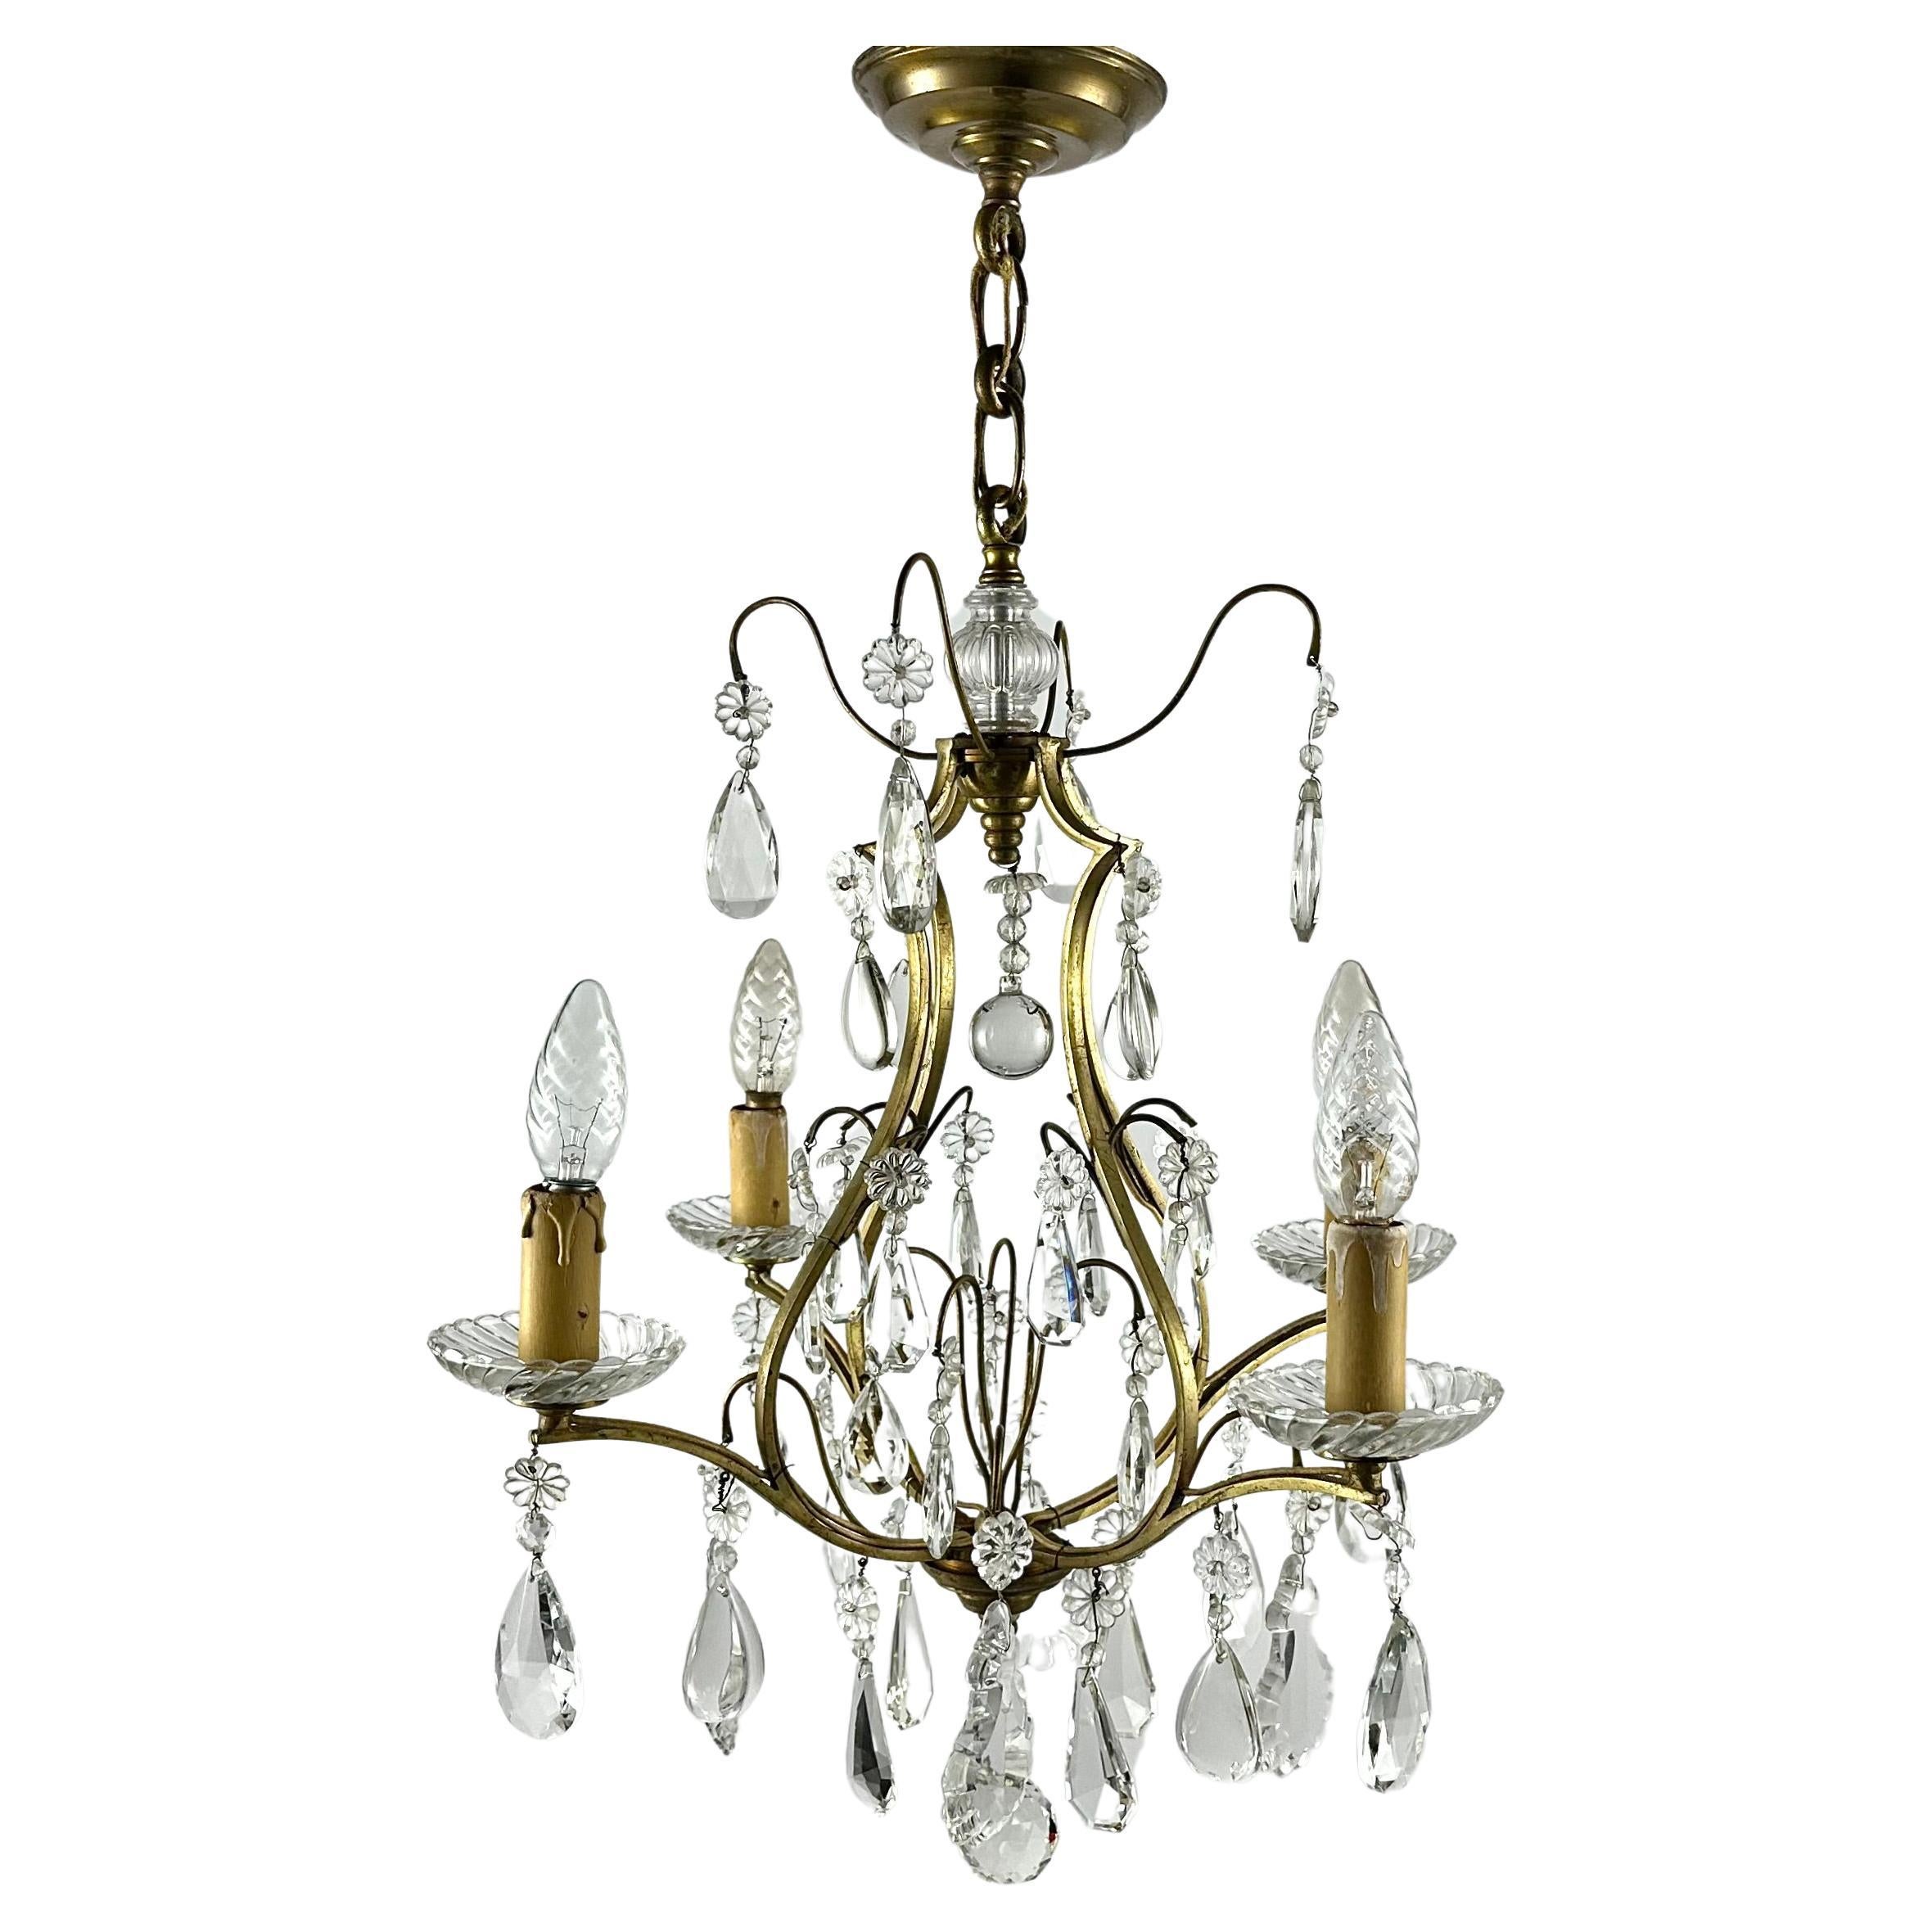 Chandelier Antique French Lighting Baroque style Early 20th Century